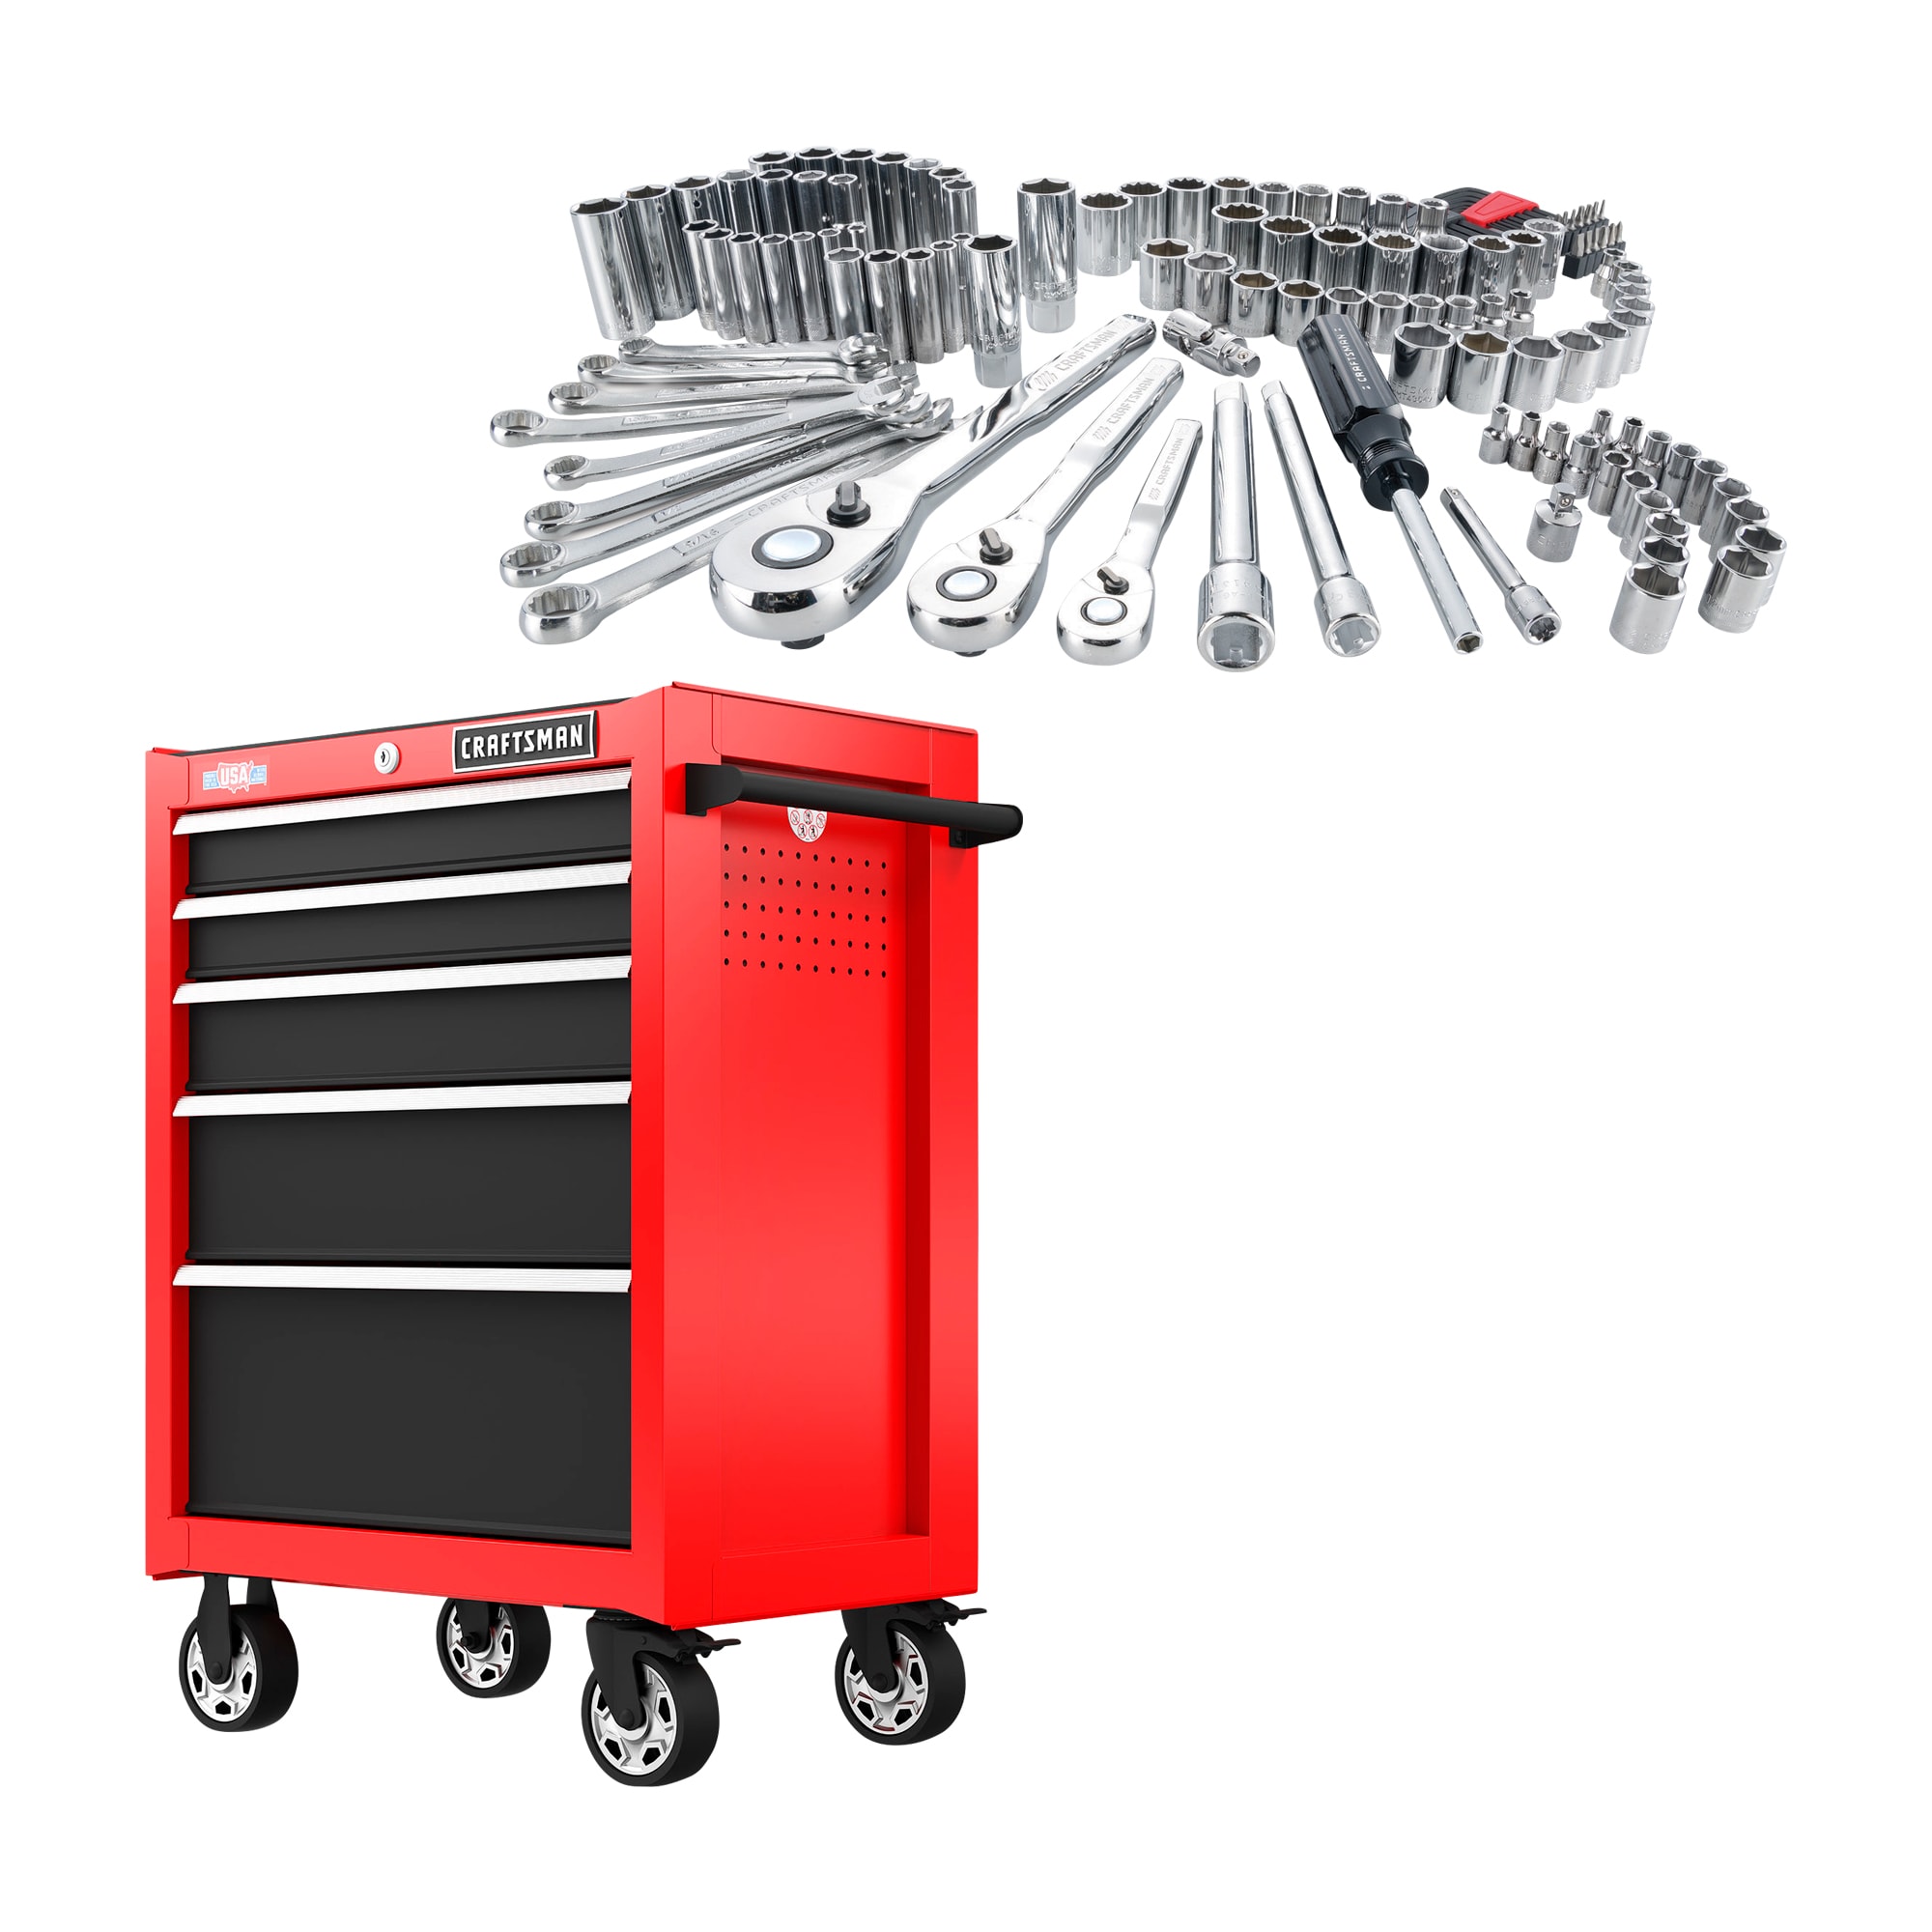 CRAFTSMAN 2000 Series 27-In 5-Drawer Cabinet - Red & 135-Piece Standard (SAE) and Metric Combination Polished Chrome Mechanics Tool Set (1/4-in